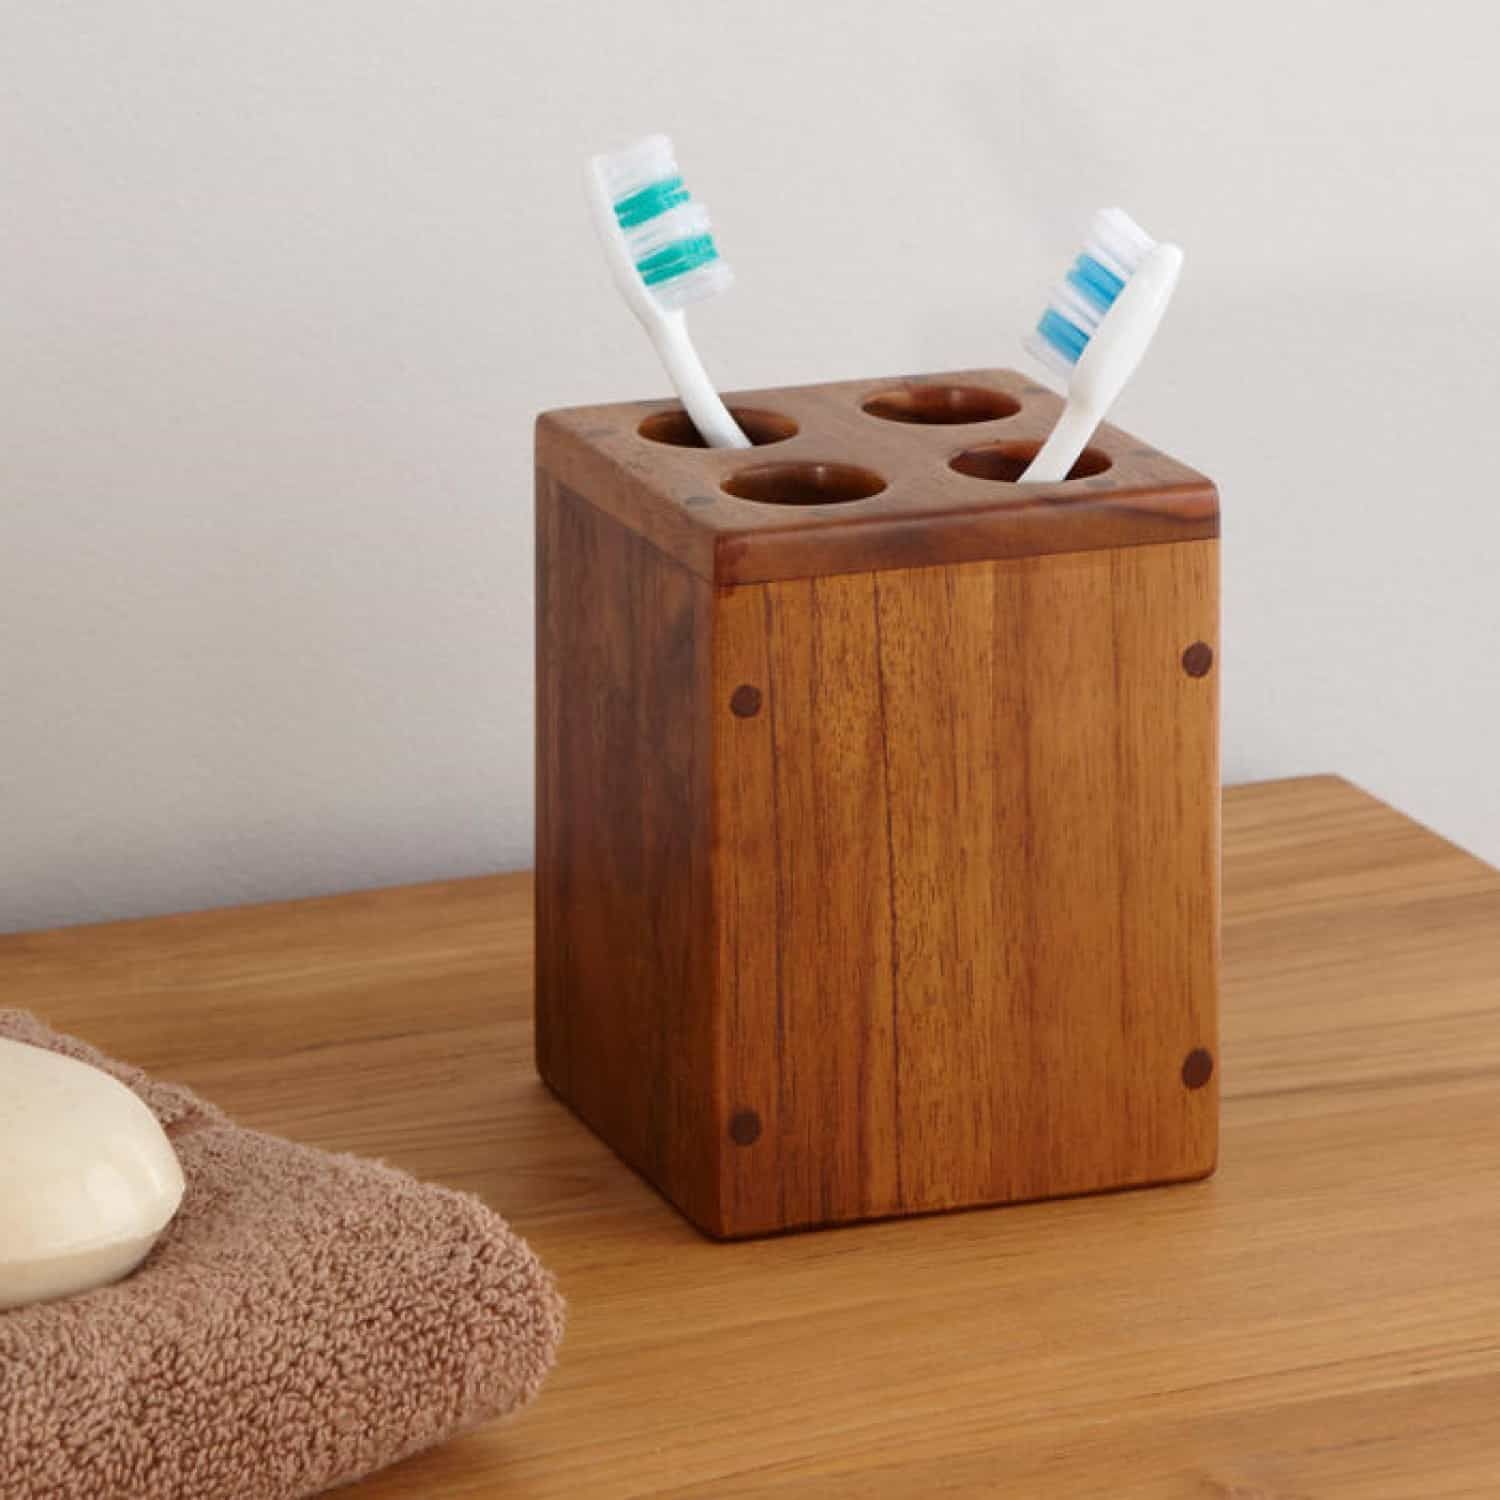 Wooden Toothbrush Holder (View 4 of 6)